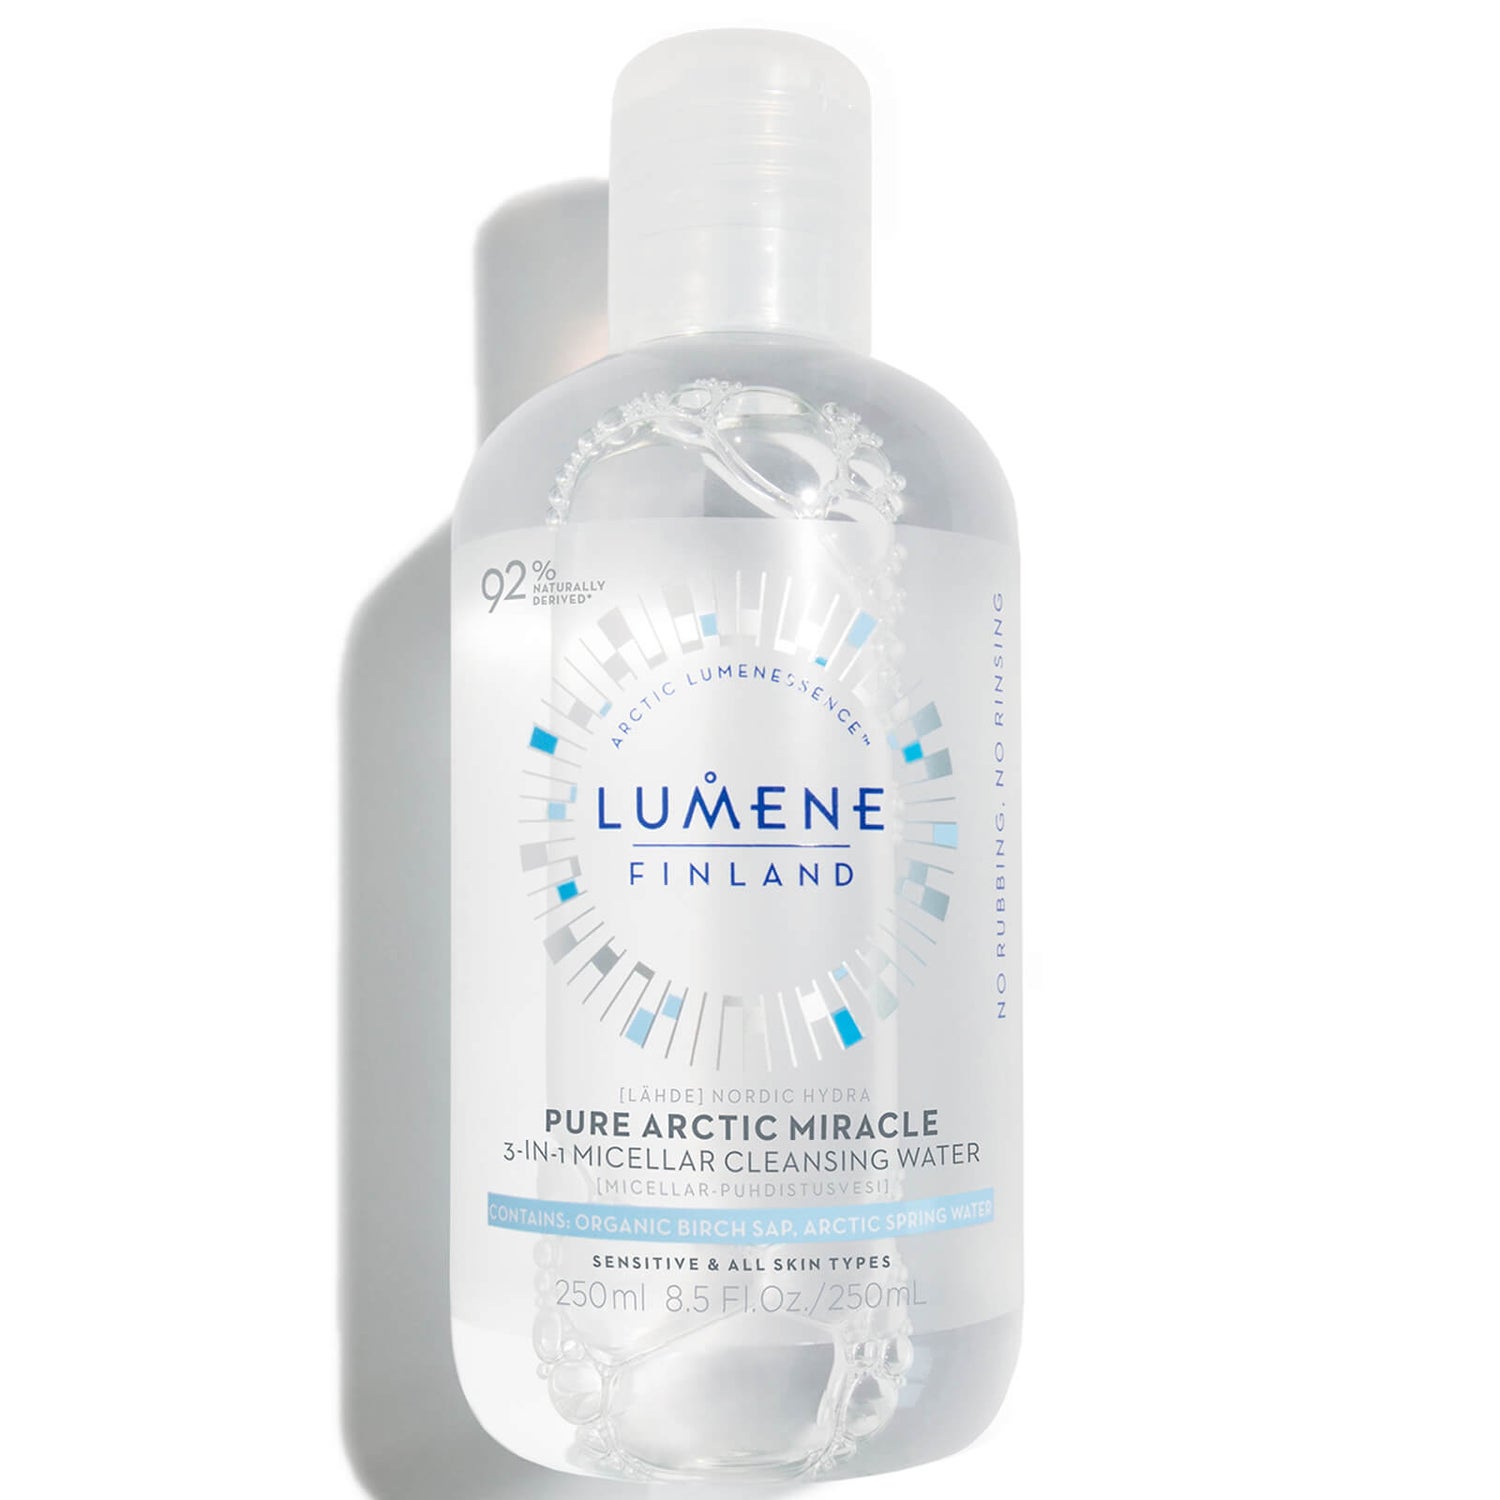 Lumene Nordic Hydra [Lähde] Pure Arctic Miracle 3-In-1 Micellar Cleansing Water 250 ml